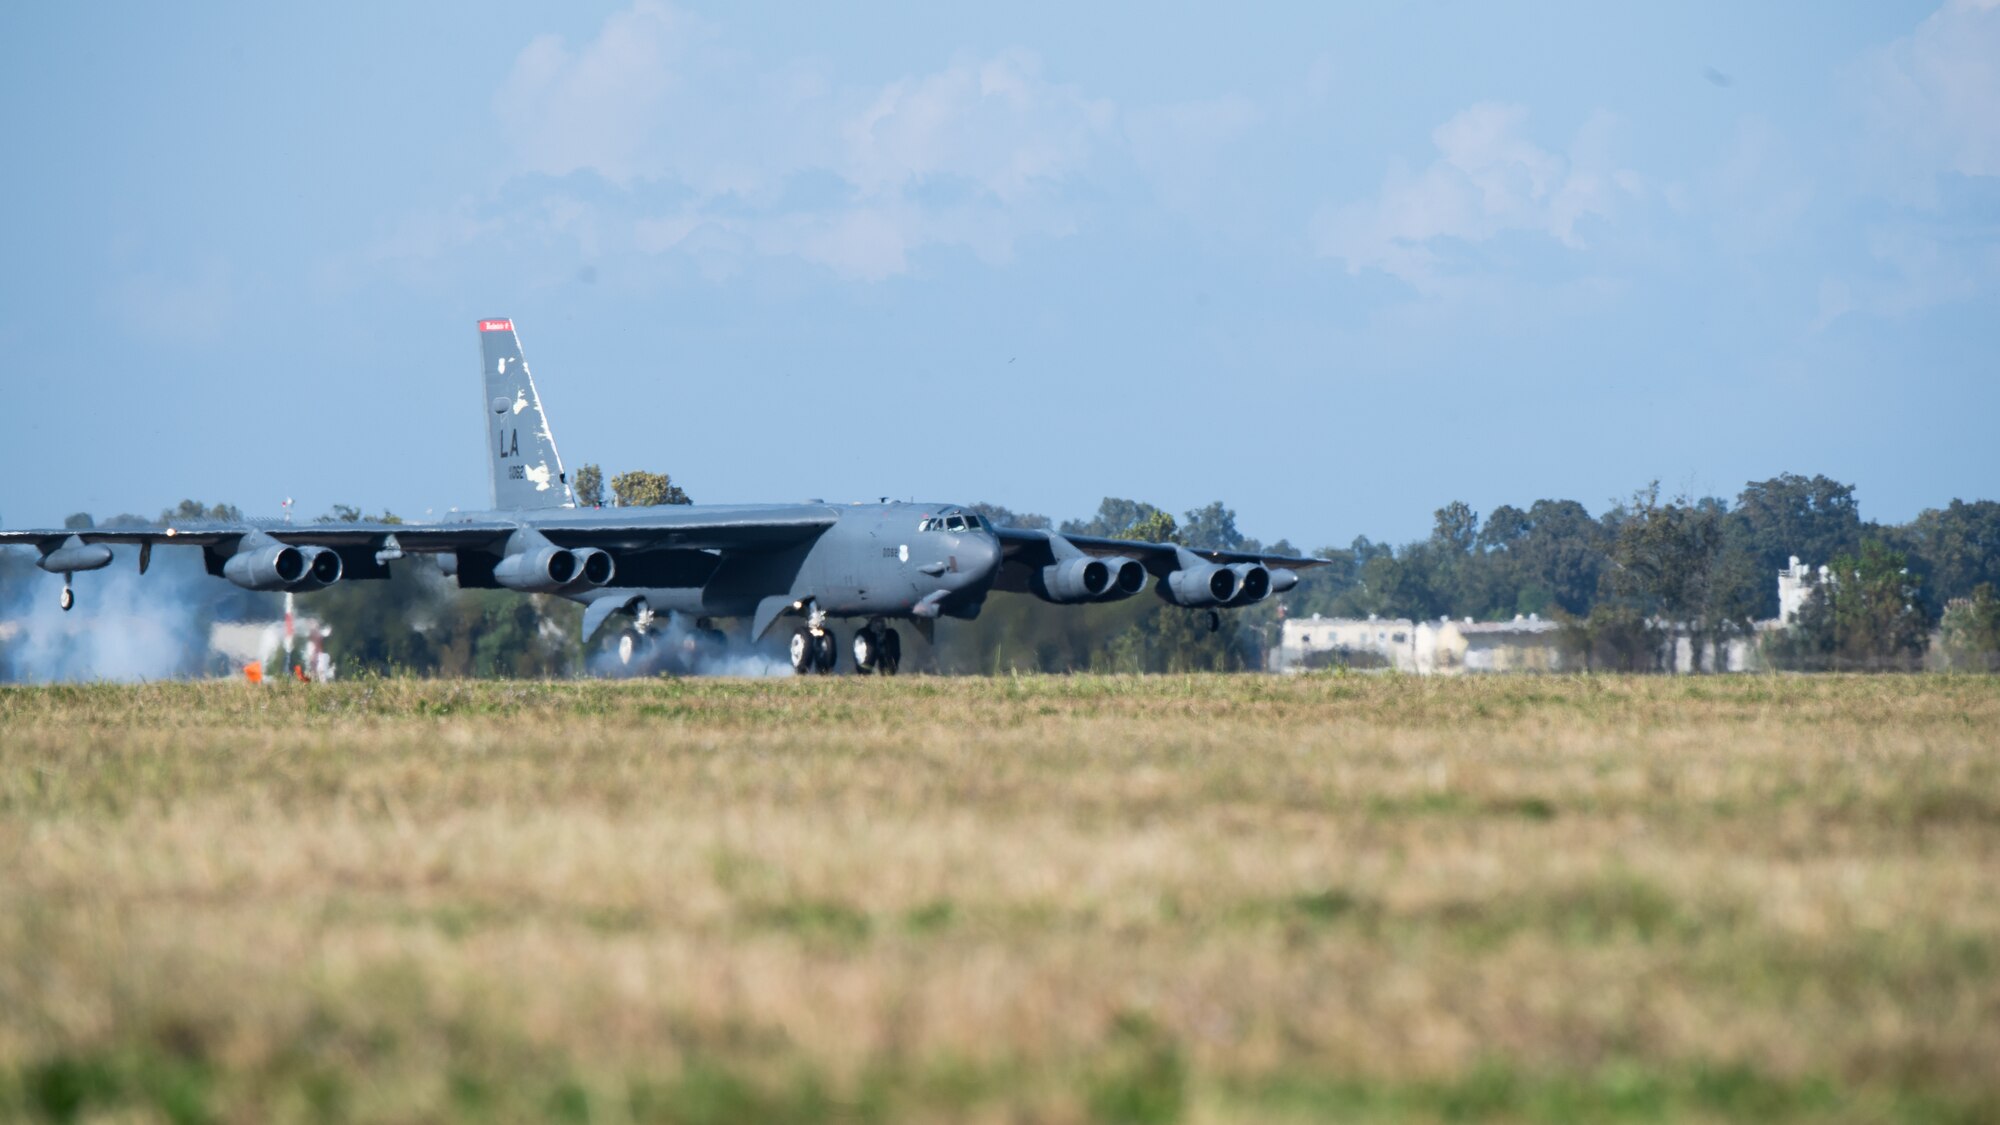 A B-52H Stratofortress lands at Barksdale Air Force Base, La., as part of Global Thunder 21, Oct. 20, 2020. GLOBAL THUNDER is an invaluable training opportunity to exercise all U.S. Strategic Command mission areas and create the conditions for strategic deterrence against a variety of threats. (U.S. Air Force photo by Airman 1st Class Jacob B. Wrightsman)